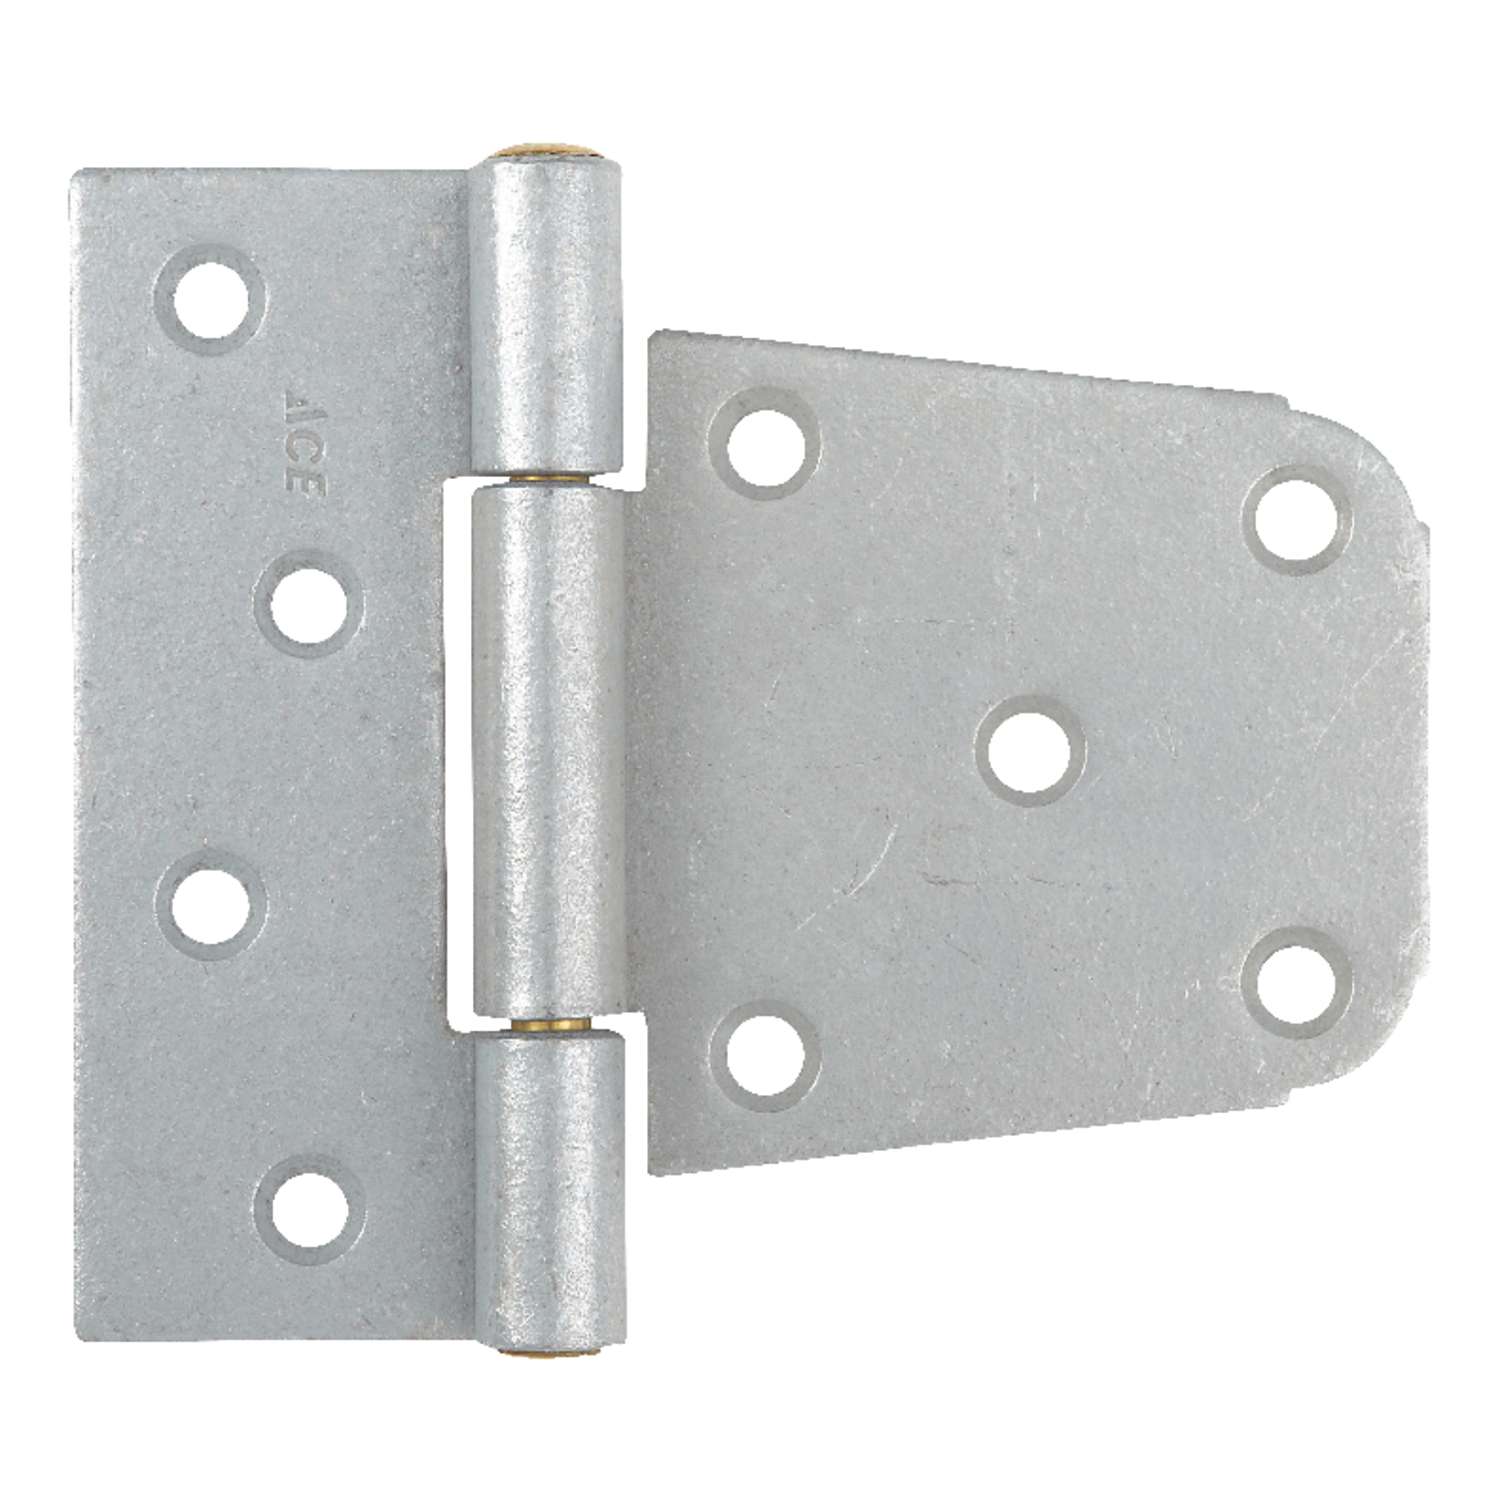 id:e3d 58 94 dee New Lon0167 2pcs Stainless Featured Steel Wooden Boxes reliable efficacy Crates Door Gate pipe tube Hinges 